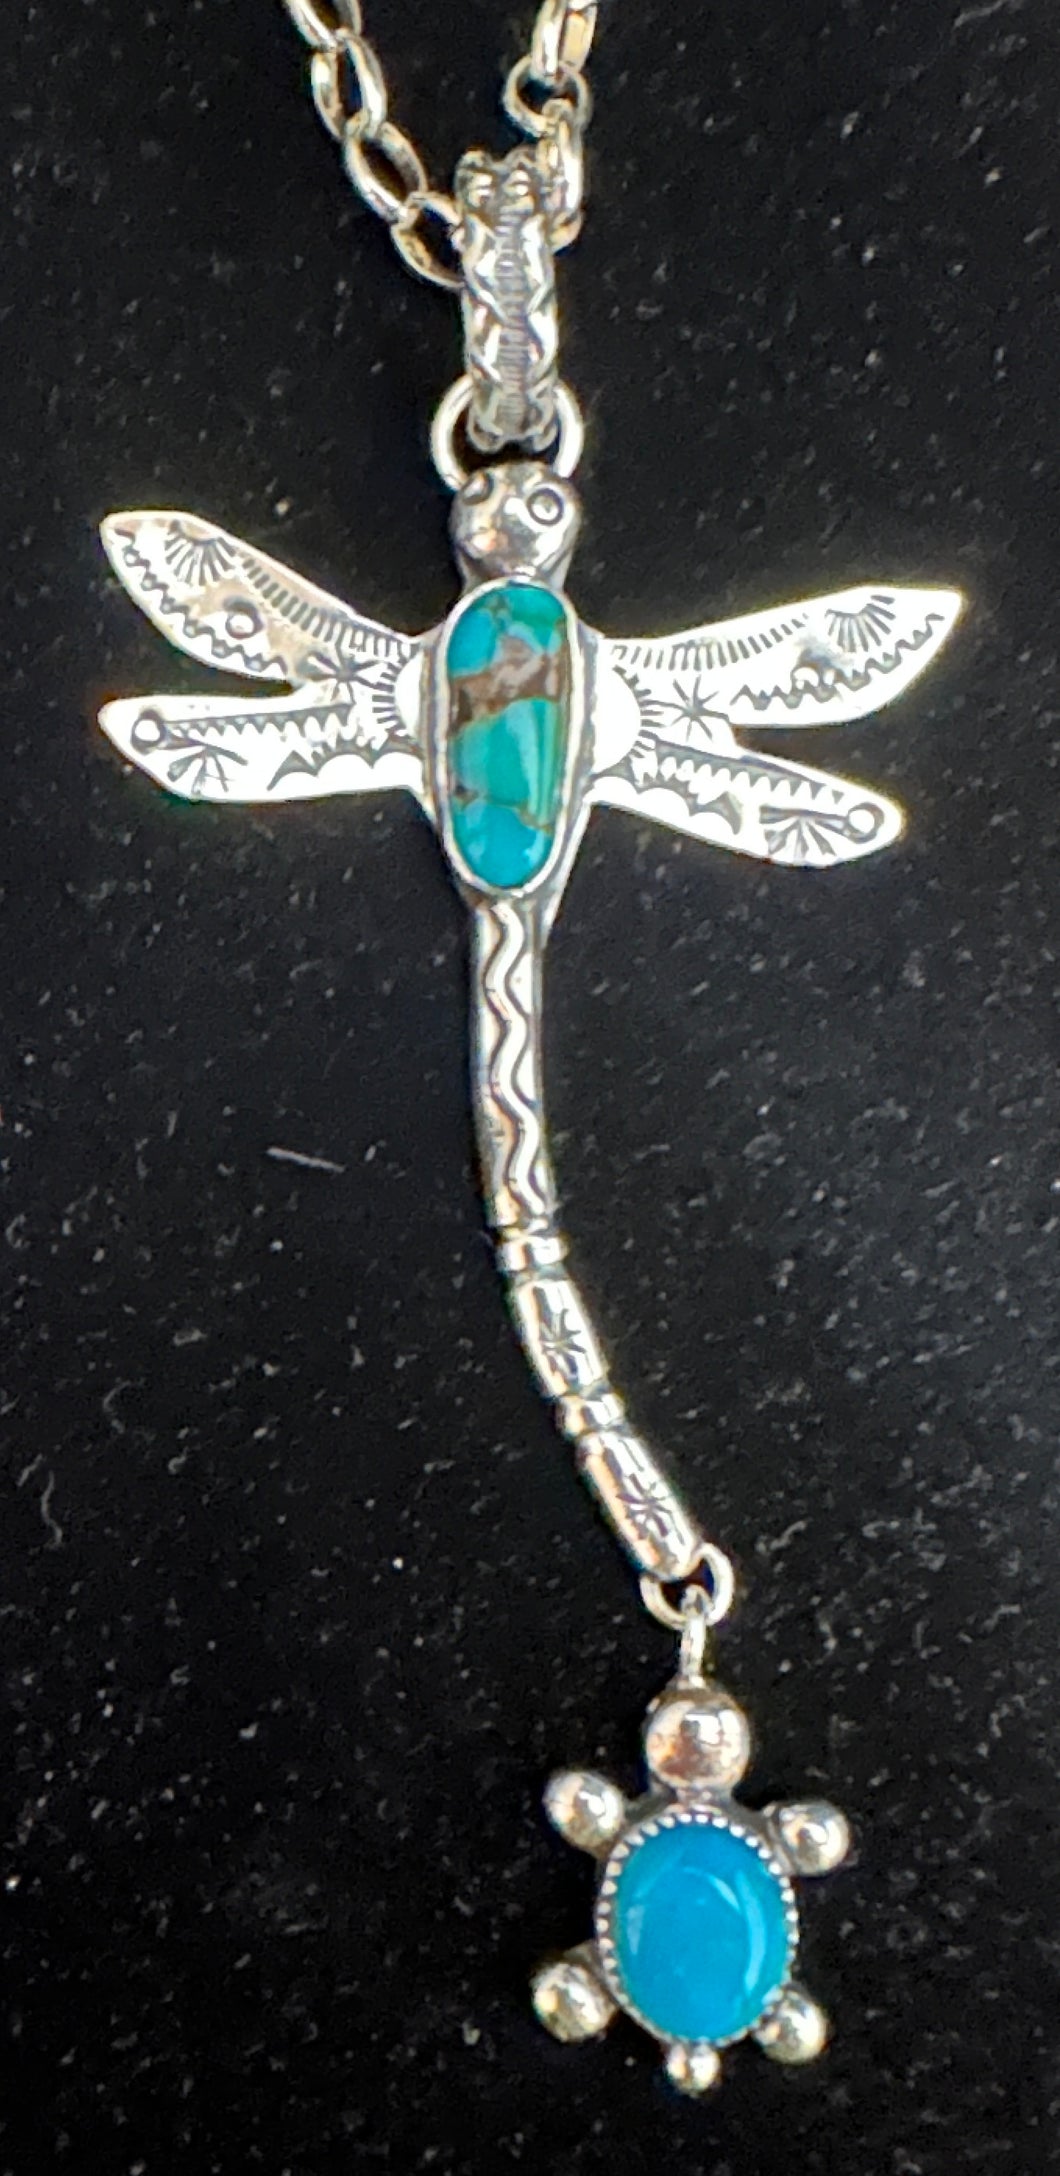 Turquoise Sterling Silver Dragonfly with Turtle Necklace Pendant